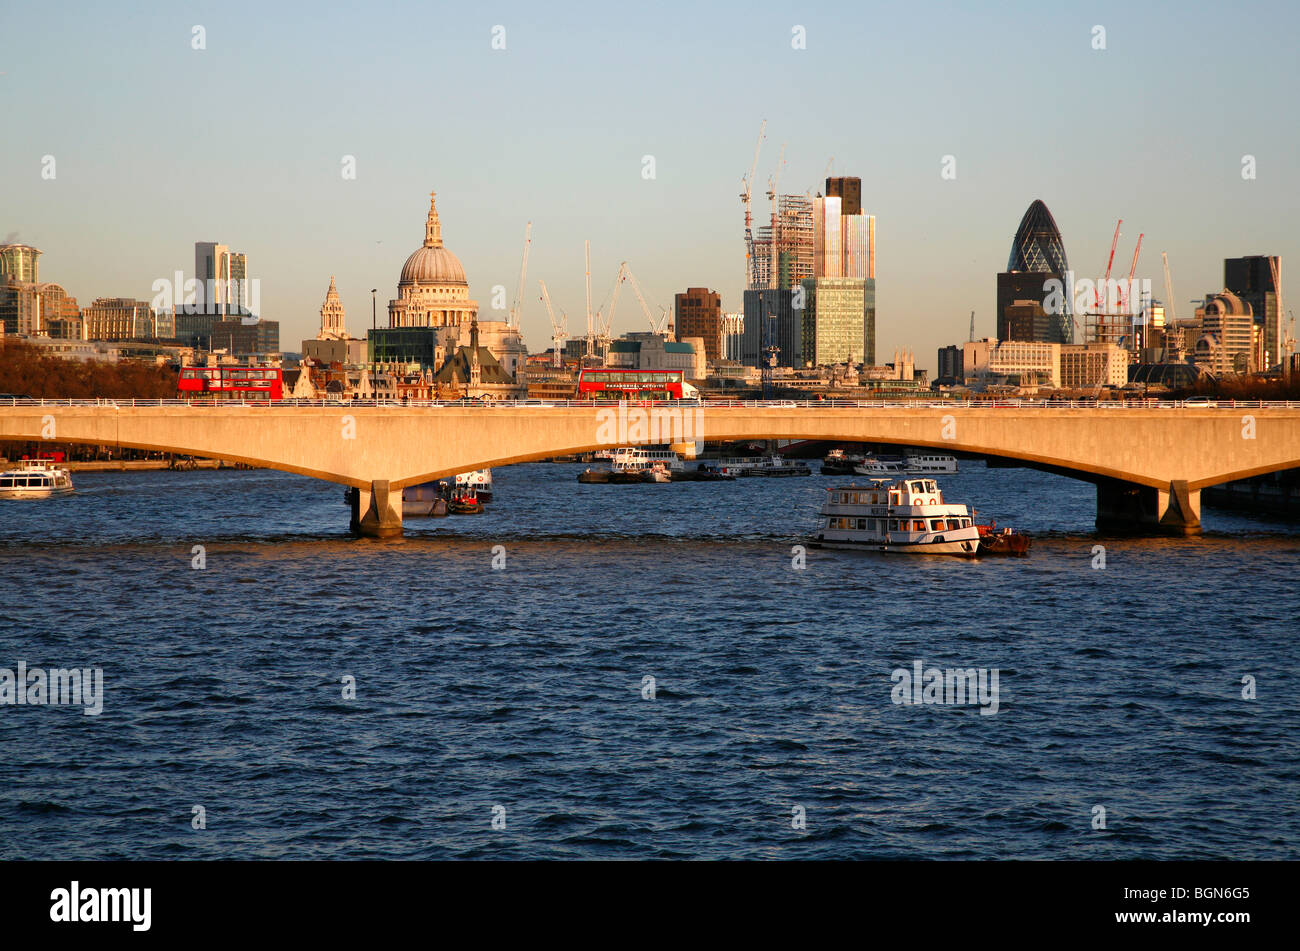 Looking down the River Thames to Waterloo Bridge and beyond to St Paul's Cathedral and City of London, UK Stock Photo